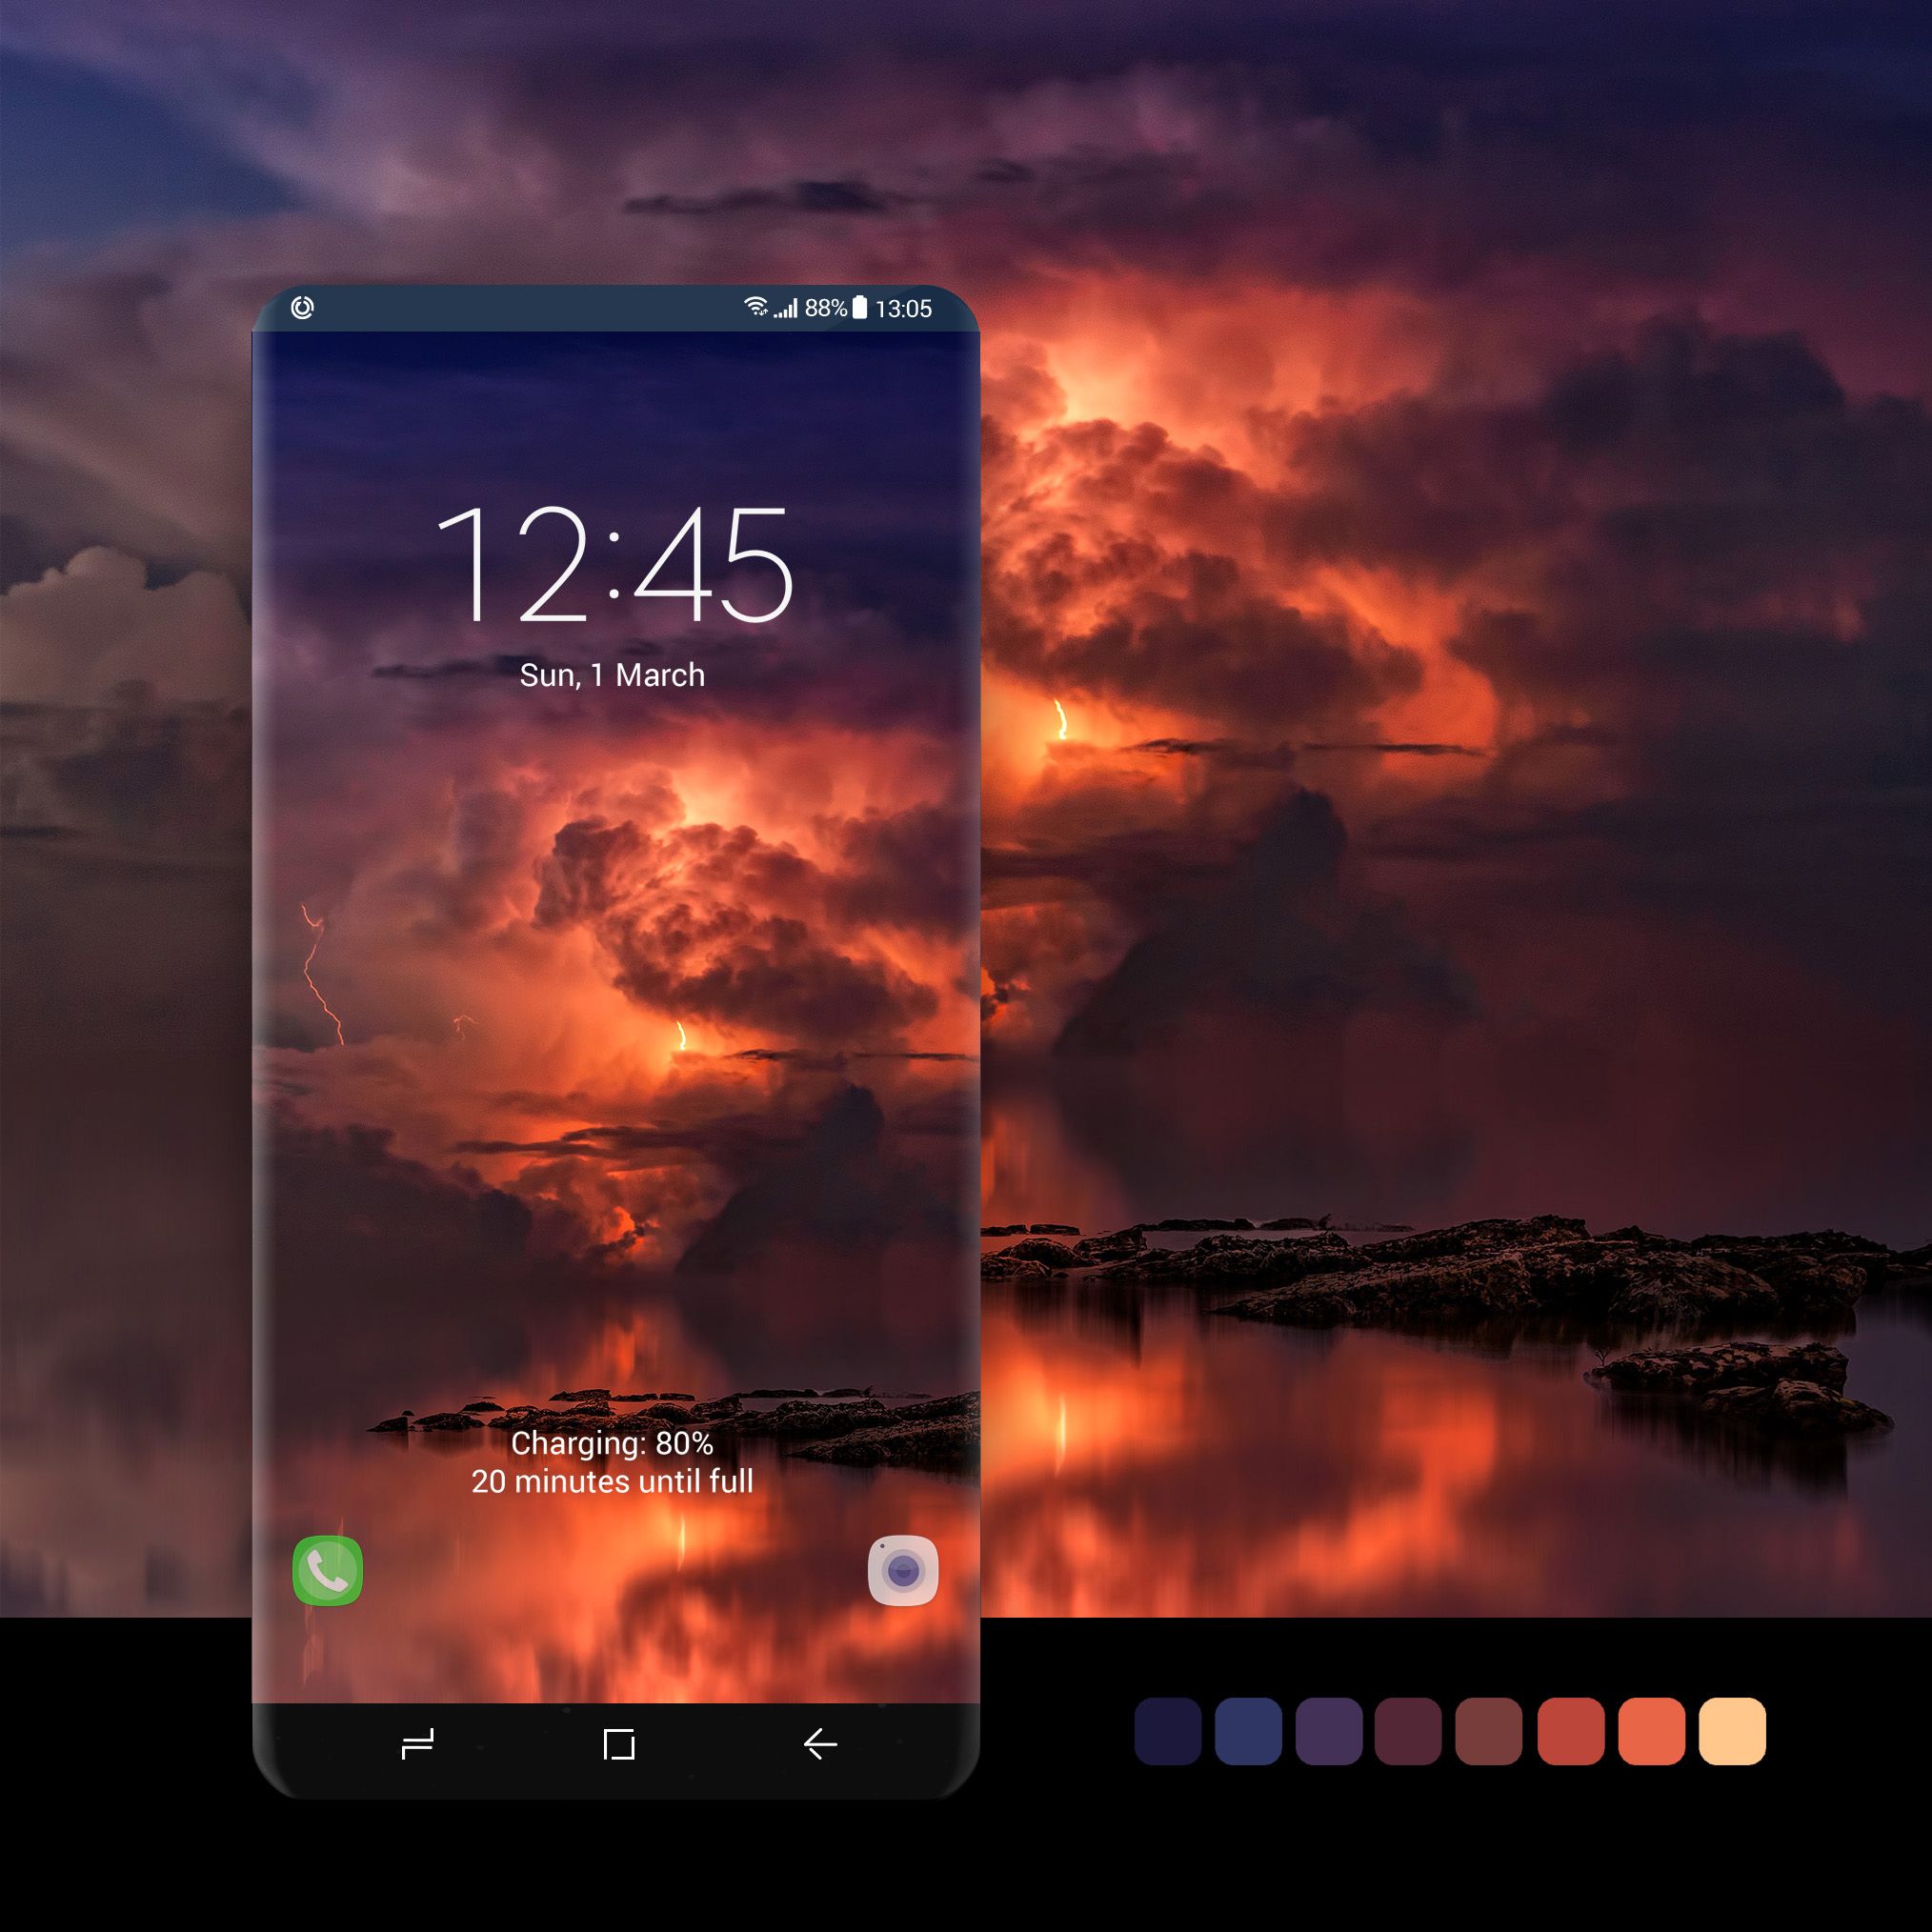 Thunderstorm Sky Wallpaper Android Phone